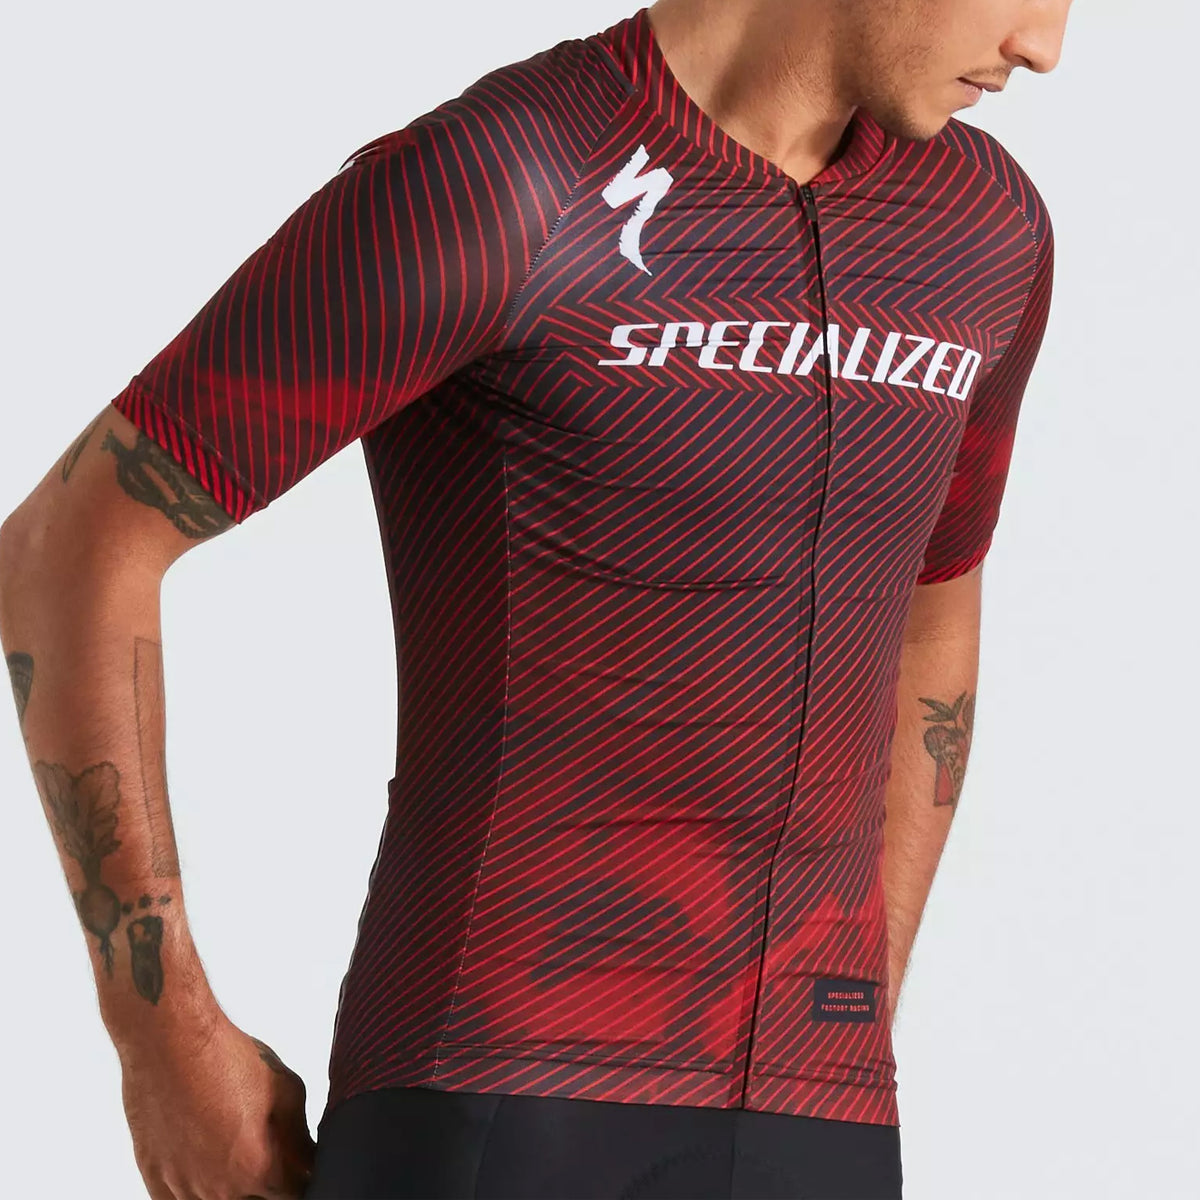 Maillot Specialized Team Rojo All4cycling